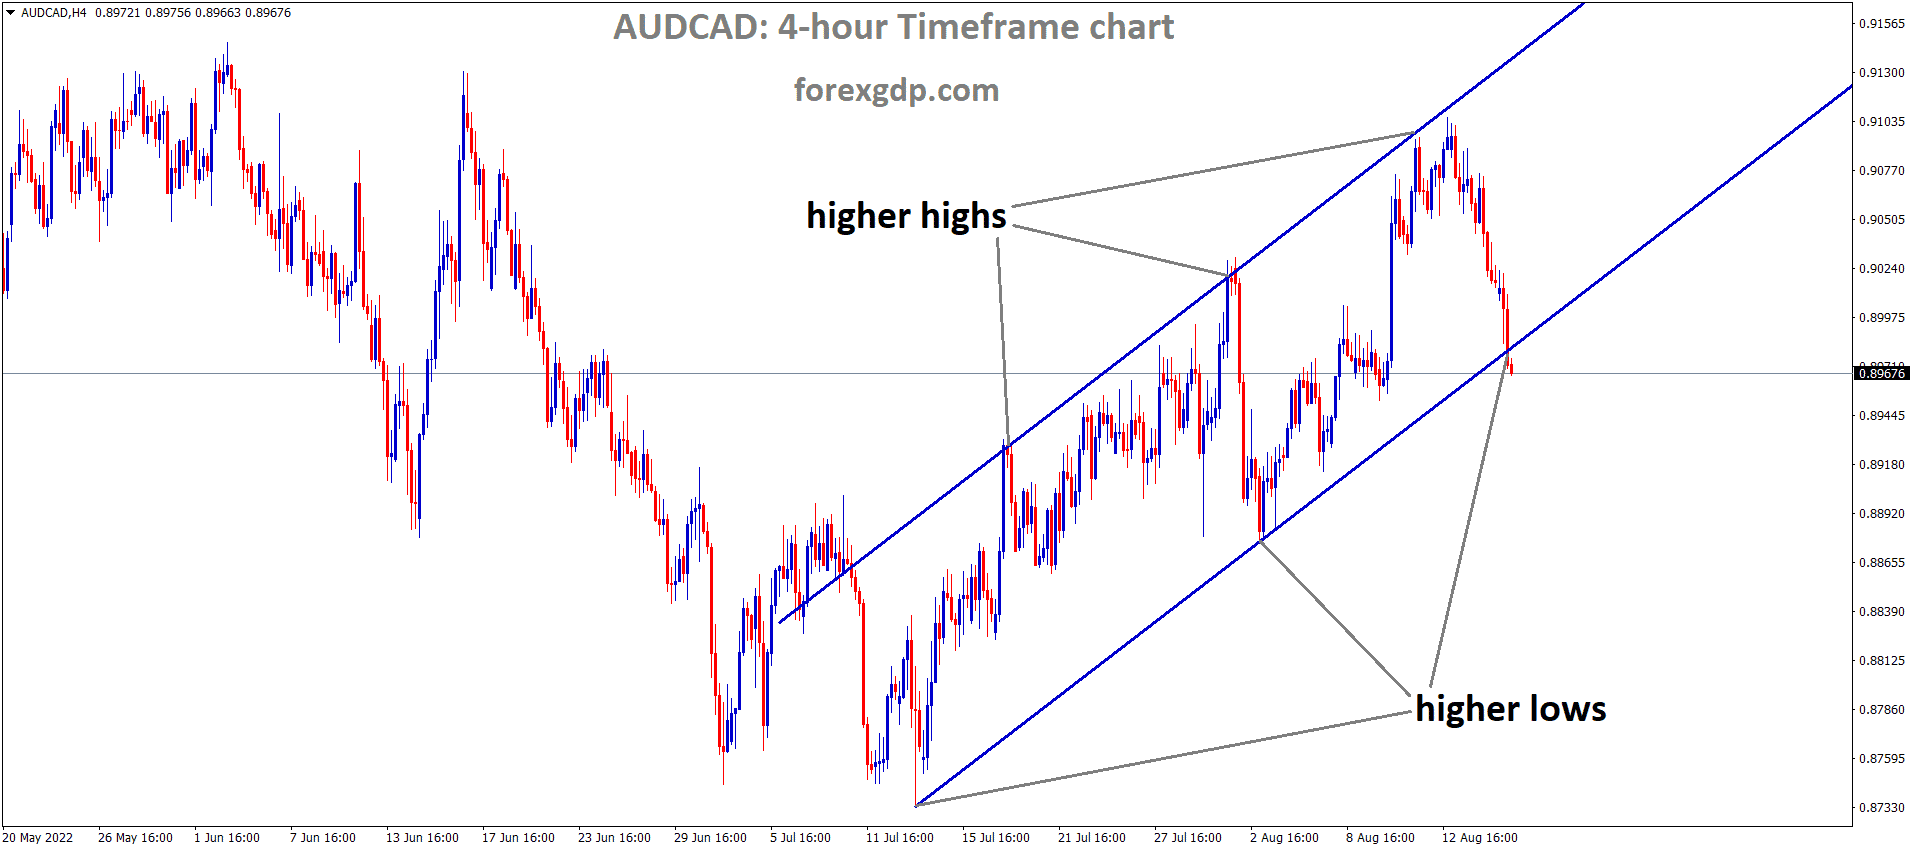 AUDCAD is moving in an Ascending channel and the Market has reached the higher low area of the channel